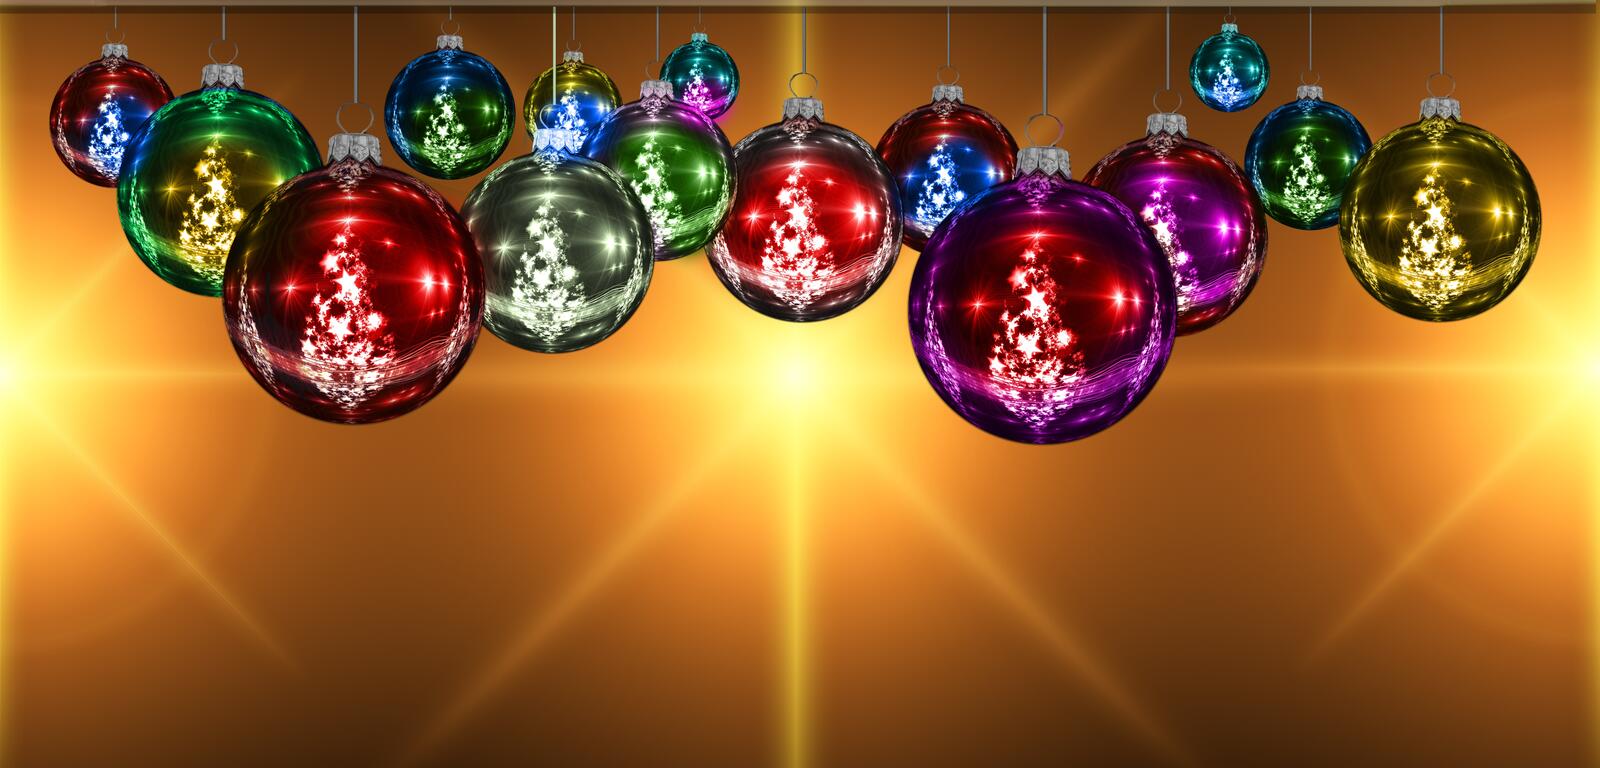 Wallpapers new year Wallpapers decoration Christmas ornament on the desktop